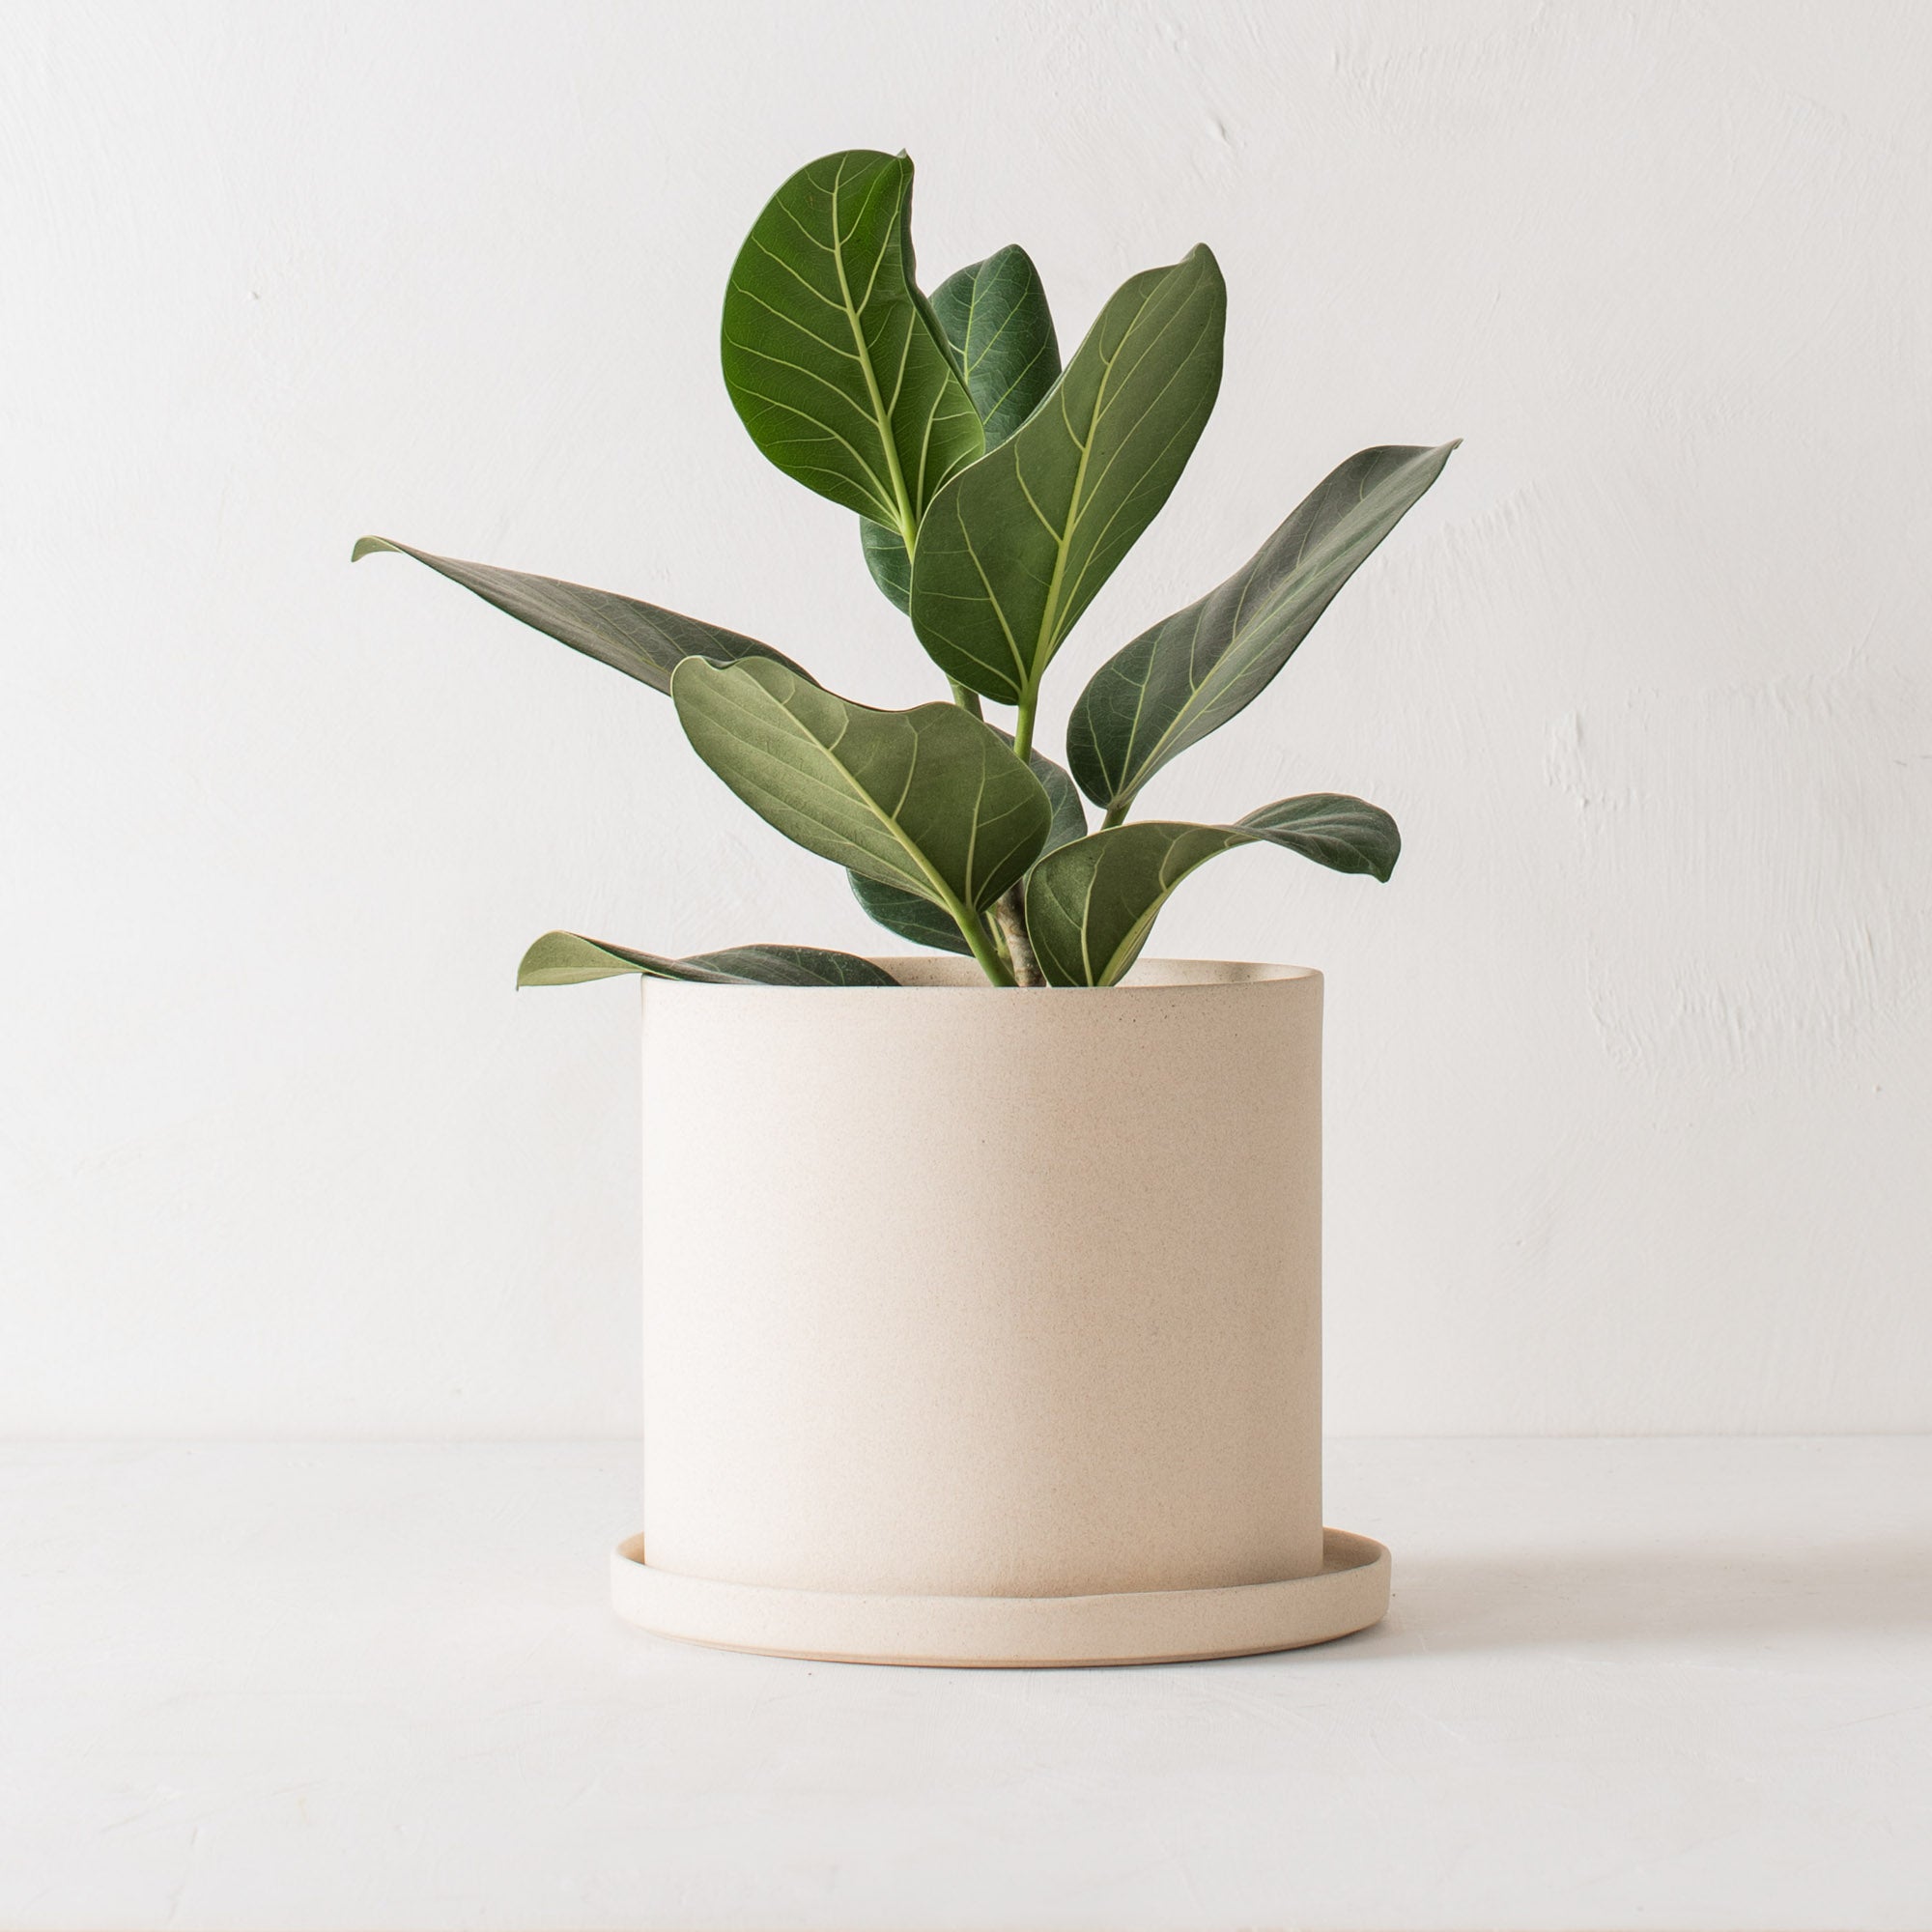 Stoneware 8 inch ceramic planter with bottom drainage dish. Staged on a white plaster textured tabletop against a plaster textured white wall. Audrey Ficus plant inside. Designed and sold by Convivial Production, Kansas City Ceramics.